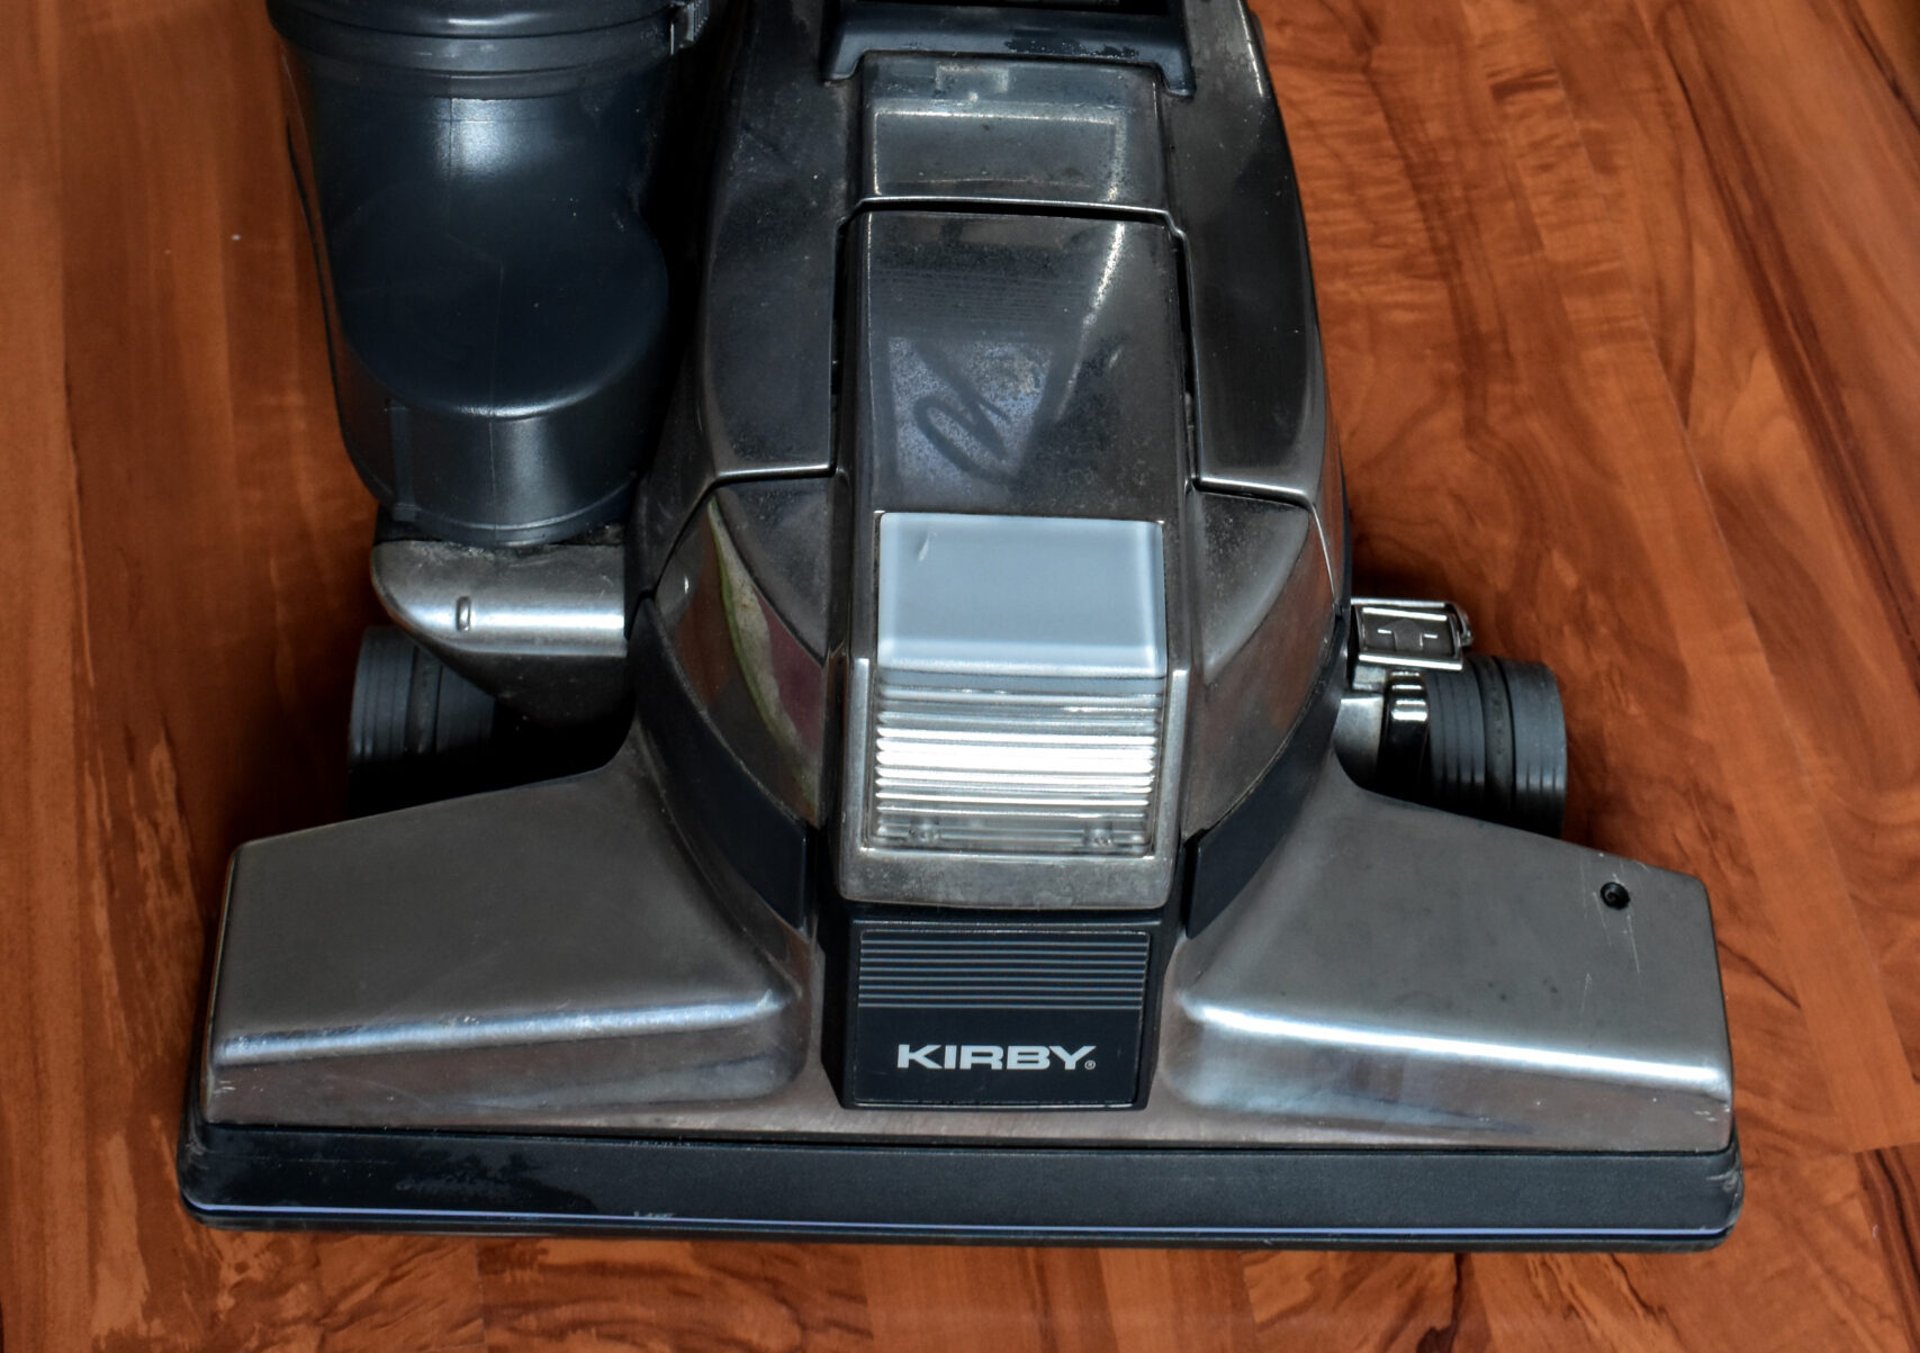 Kirby Vacuum Buying Guide For 2023: Getting A 2nd Hand Kirby 